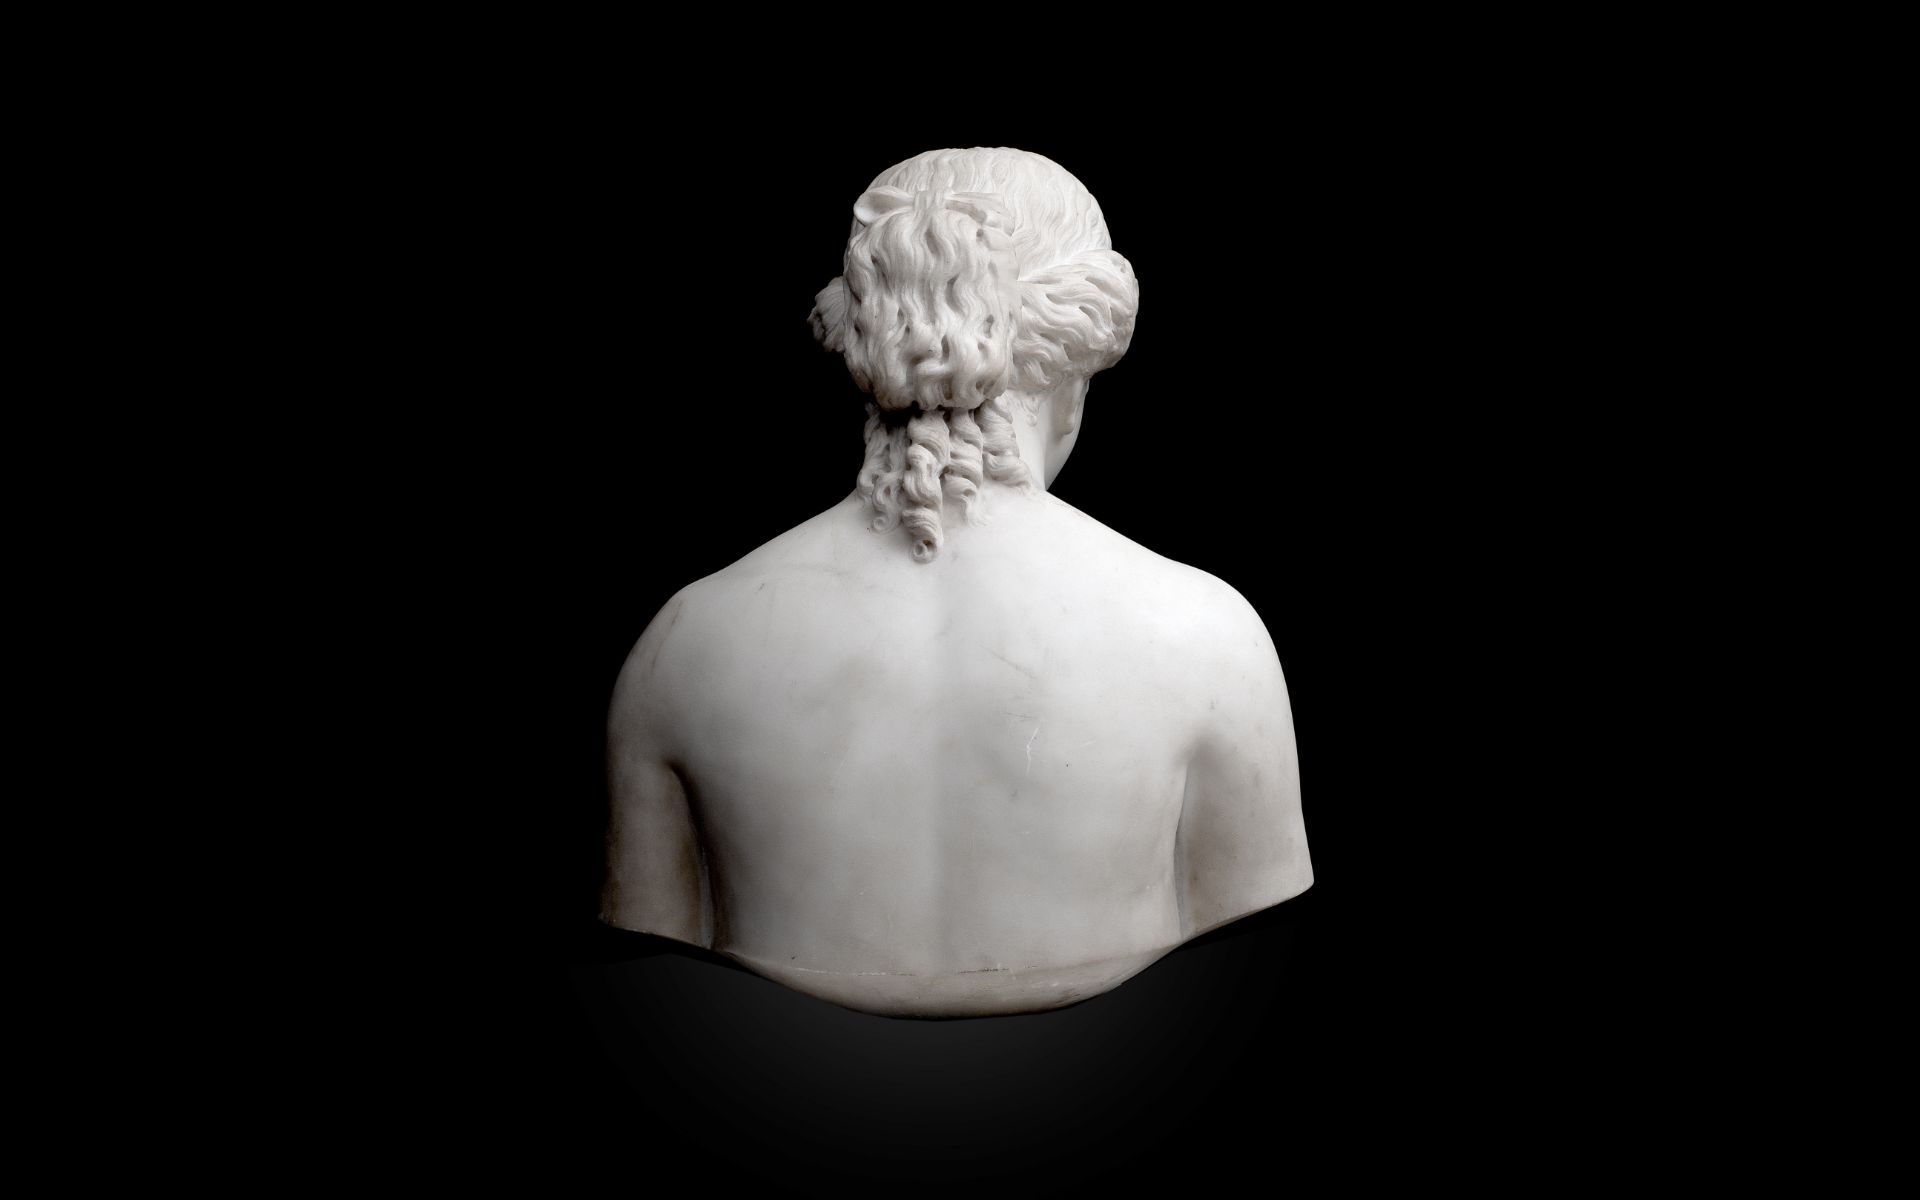 A 19TH CENTURY MARBLE BUST OF EVE, POSSIBLY BY HIRAM POWERS (AMERICAN, 1805-1873) - Image 2 of 3